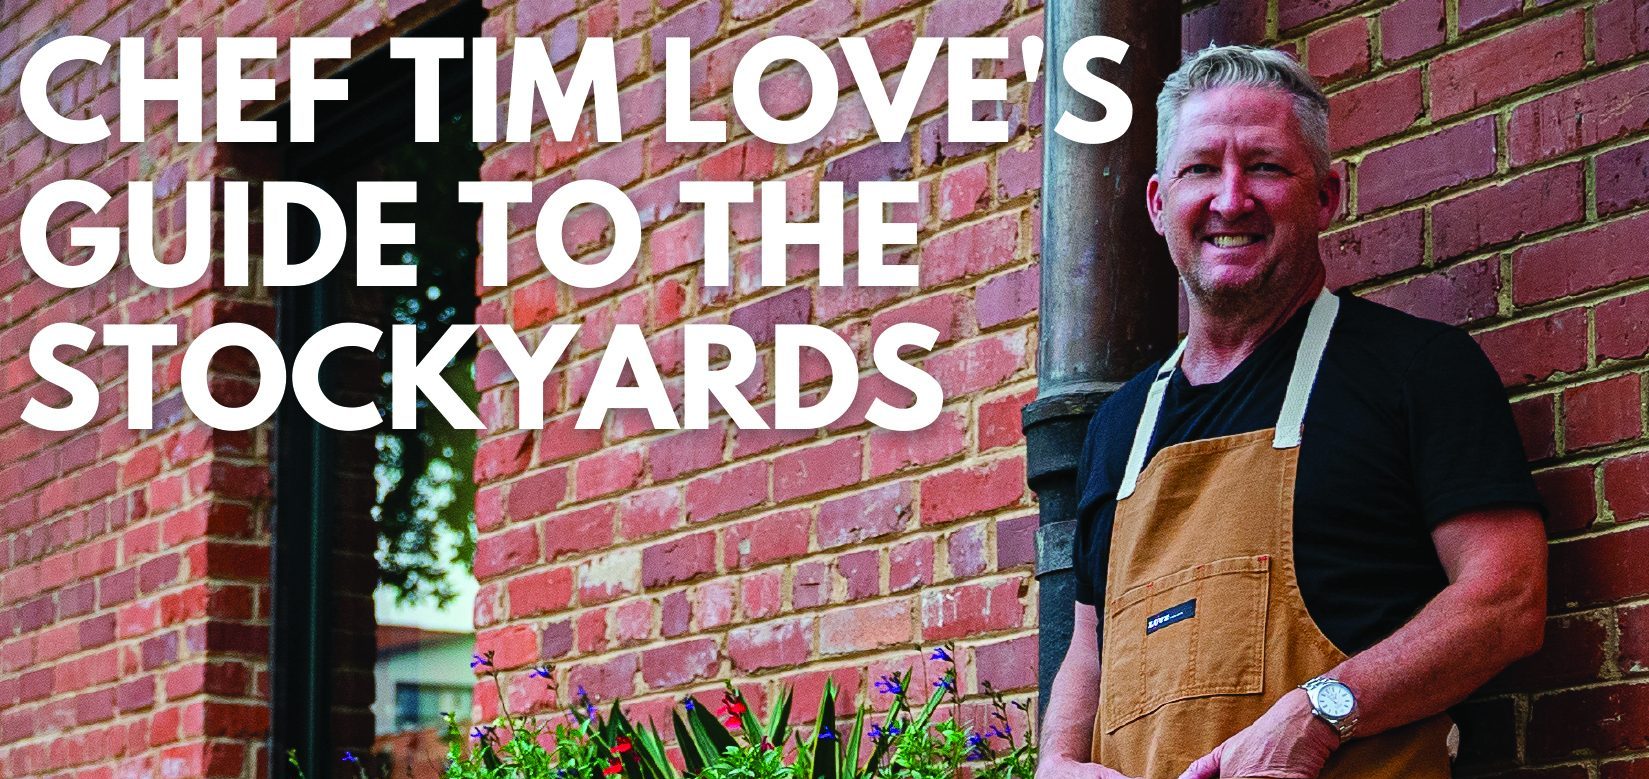 Chef Tim Love’s Guide to the Stockyards